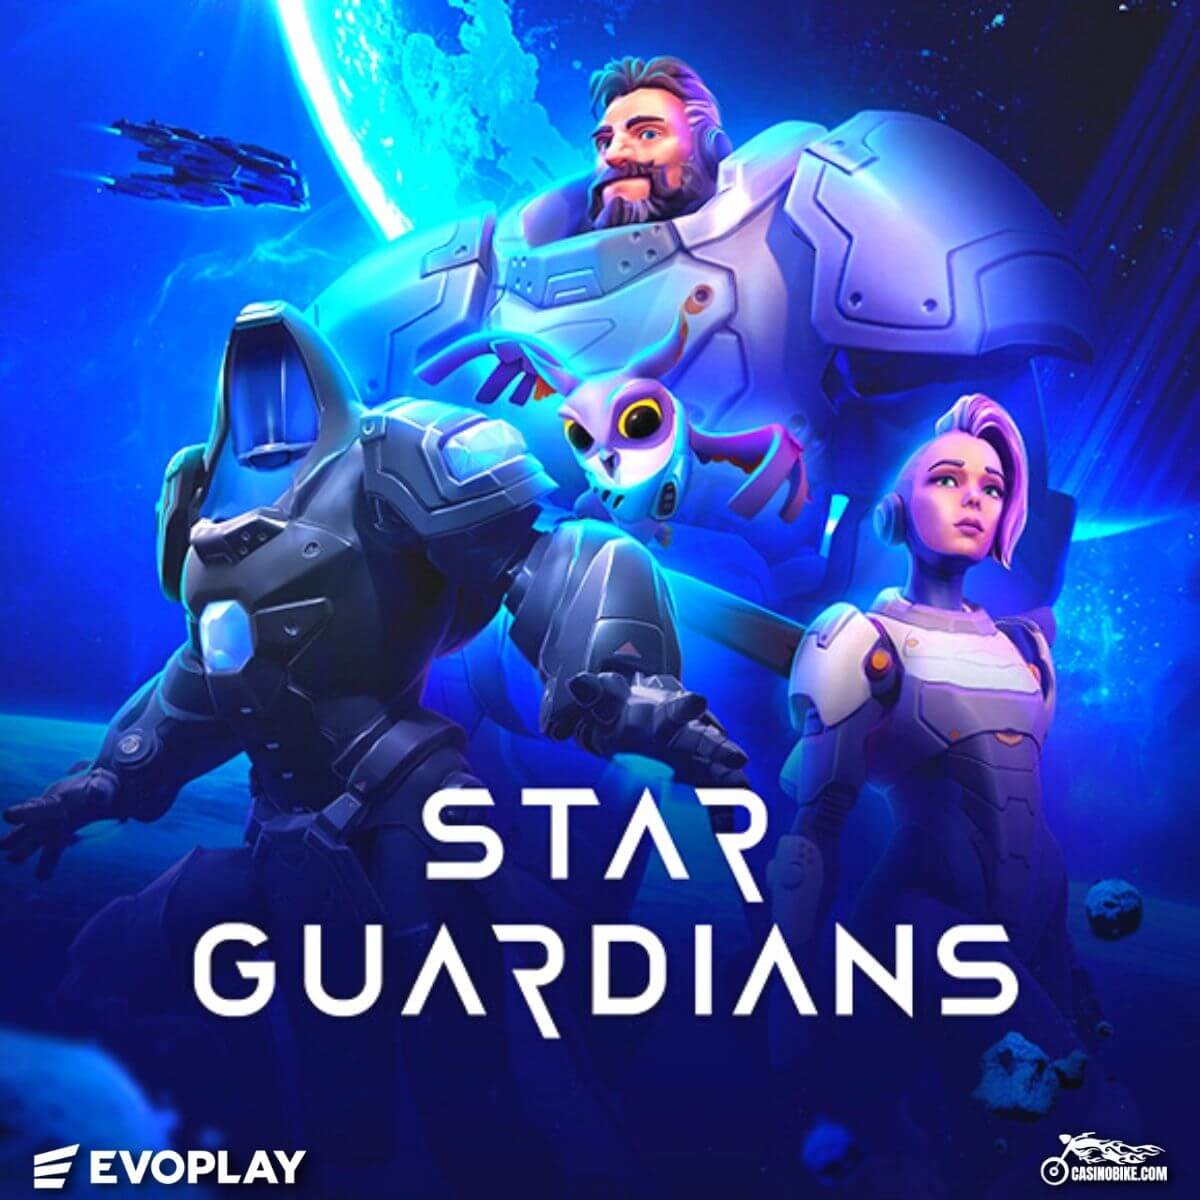 Star Guardians Slot by Evoplay Gaming